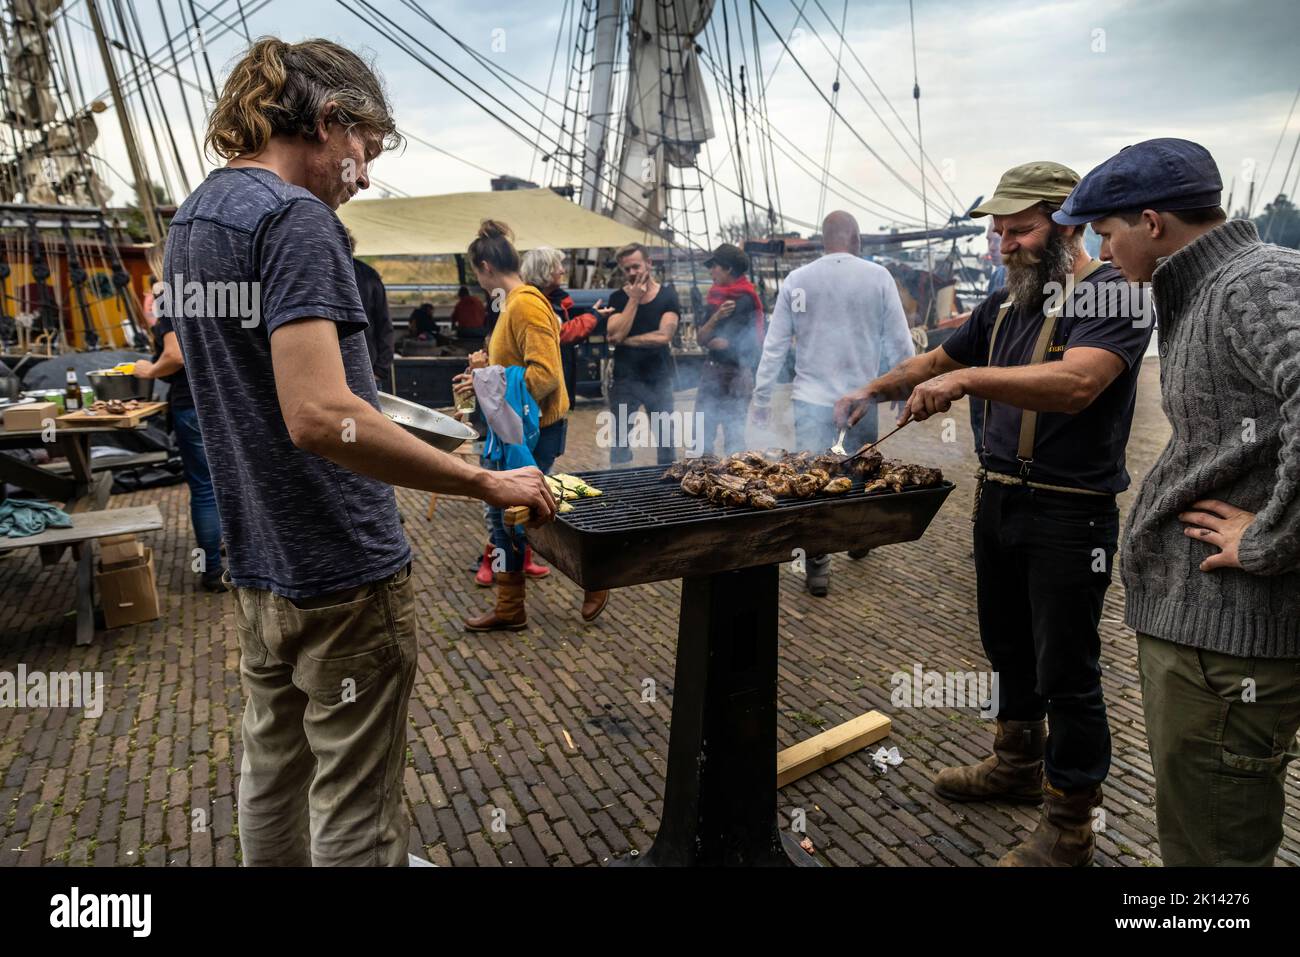 Welcome party for the crew of the 'Tres Hombres' in the home port in Den Helder. The cargo sailing vessel 'Tres Hombres' of the shipping company 'Fairtransport' has moored in its home port in Den Helder Netherlands. Here it is being prepared by the crew for its next voyage. The schooner 'Tres Hombres' transports goods such as wine, coffee, chocolate and rum from the Caribbean across the Atlantic to Europe in a completely climate-neutral manner. Stock Photo